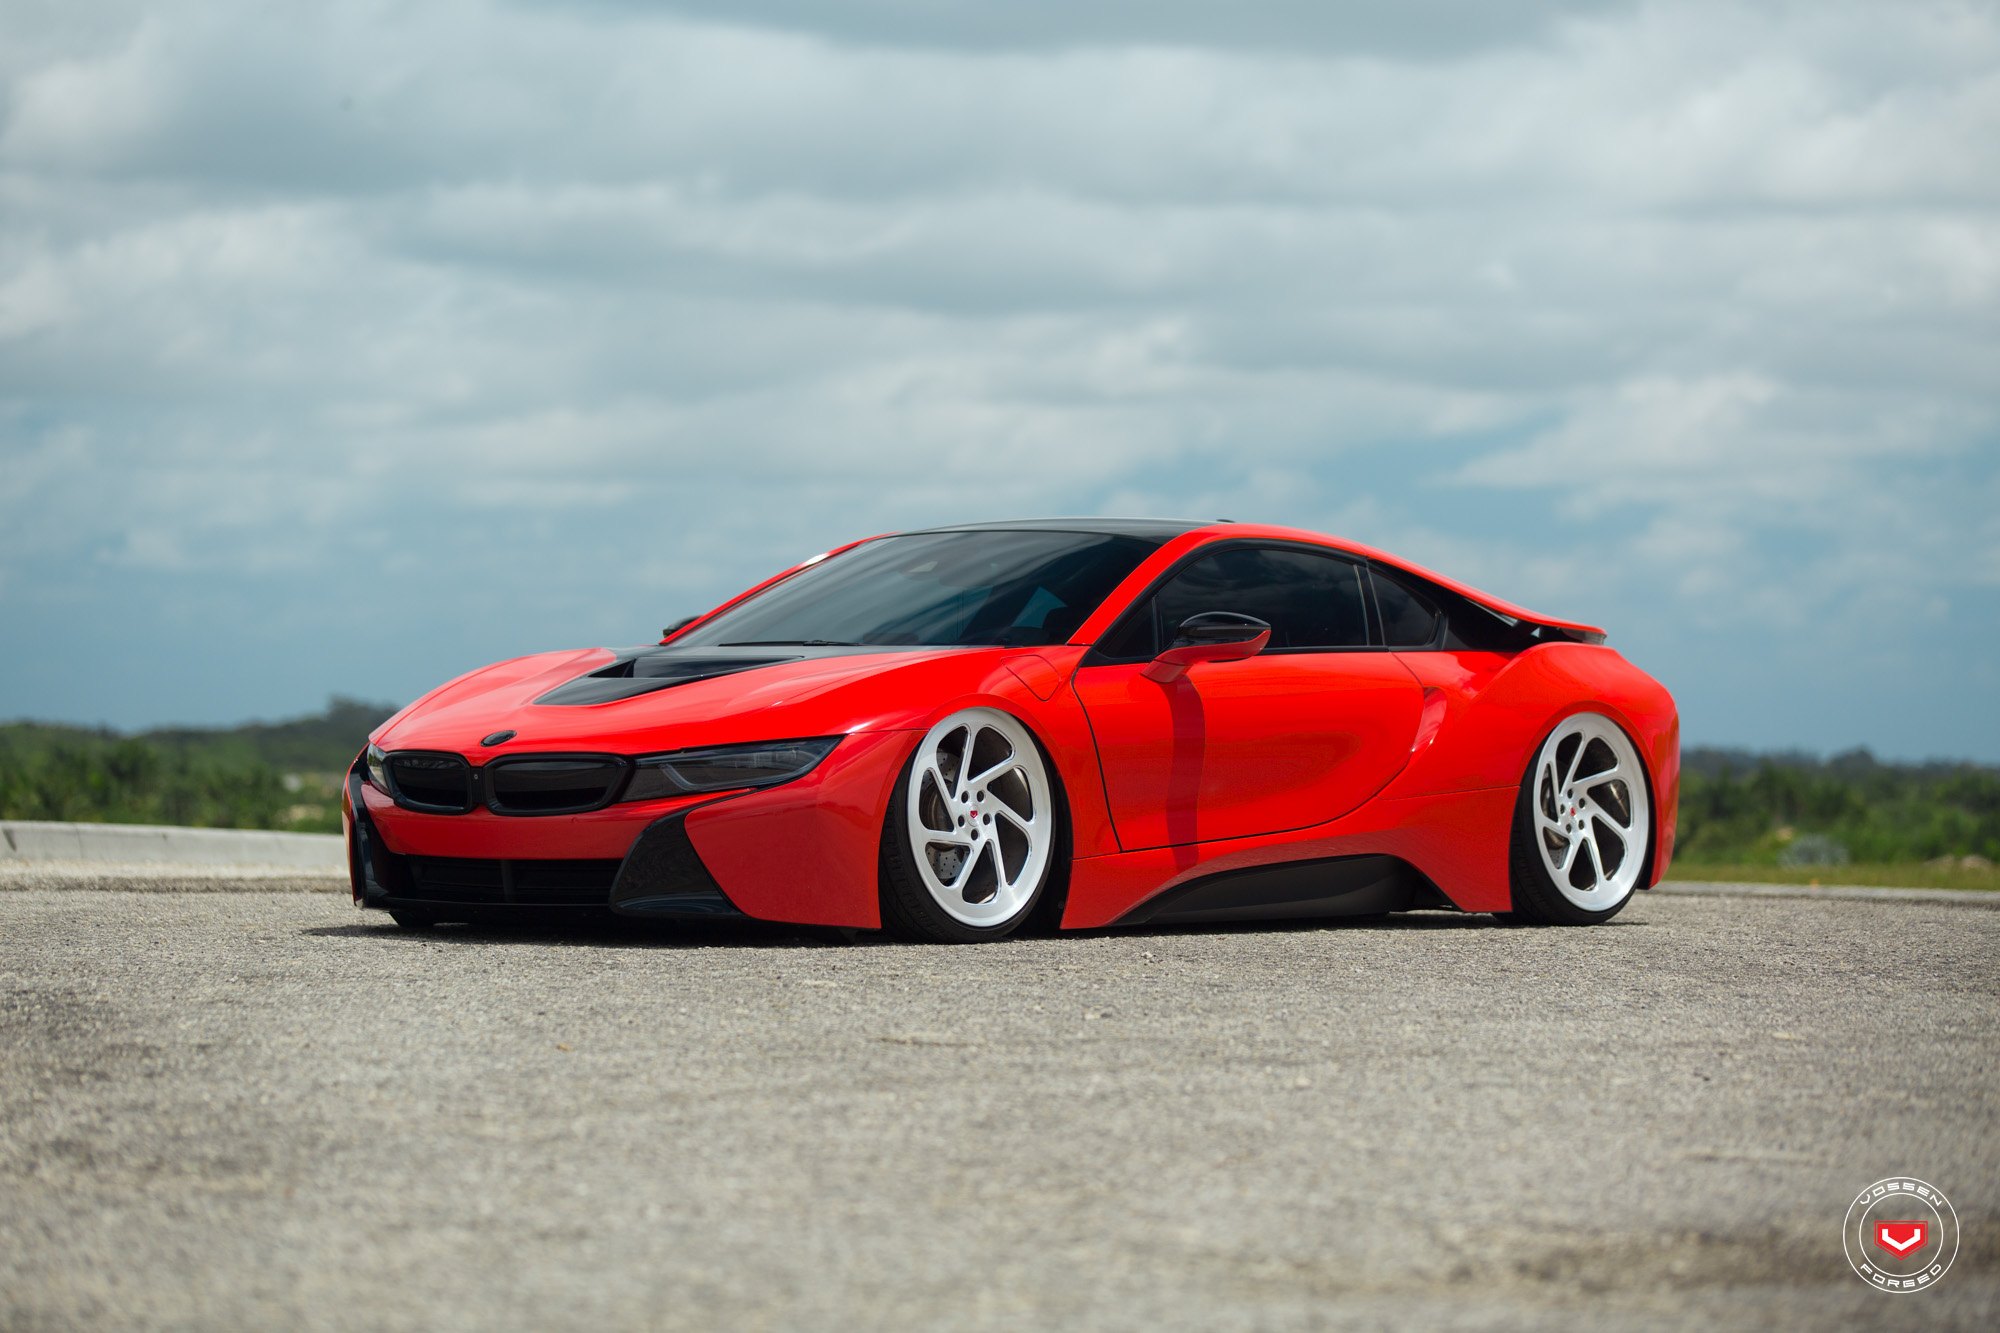 Slammed BMW i8 in Red Color - Photo by Vossen